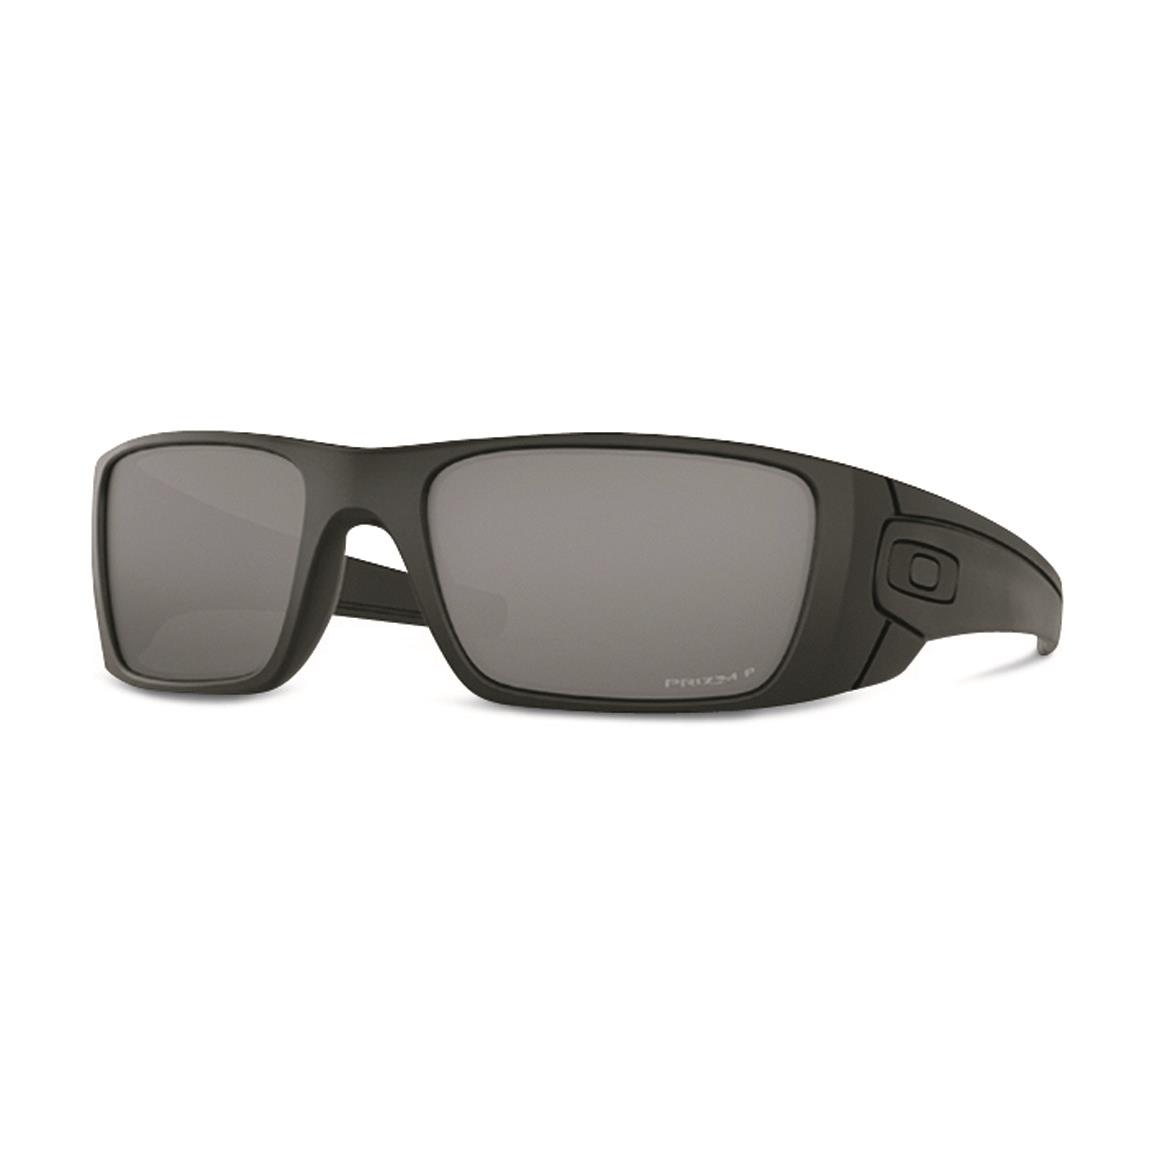 Oakley Standard Issue Fuel Cell Blackside Collection with Prizm Polarized Lenses, Matte Black/prizm Black Polarized